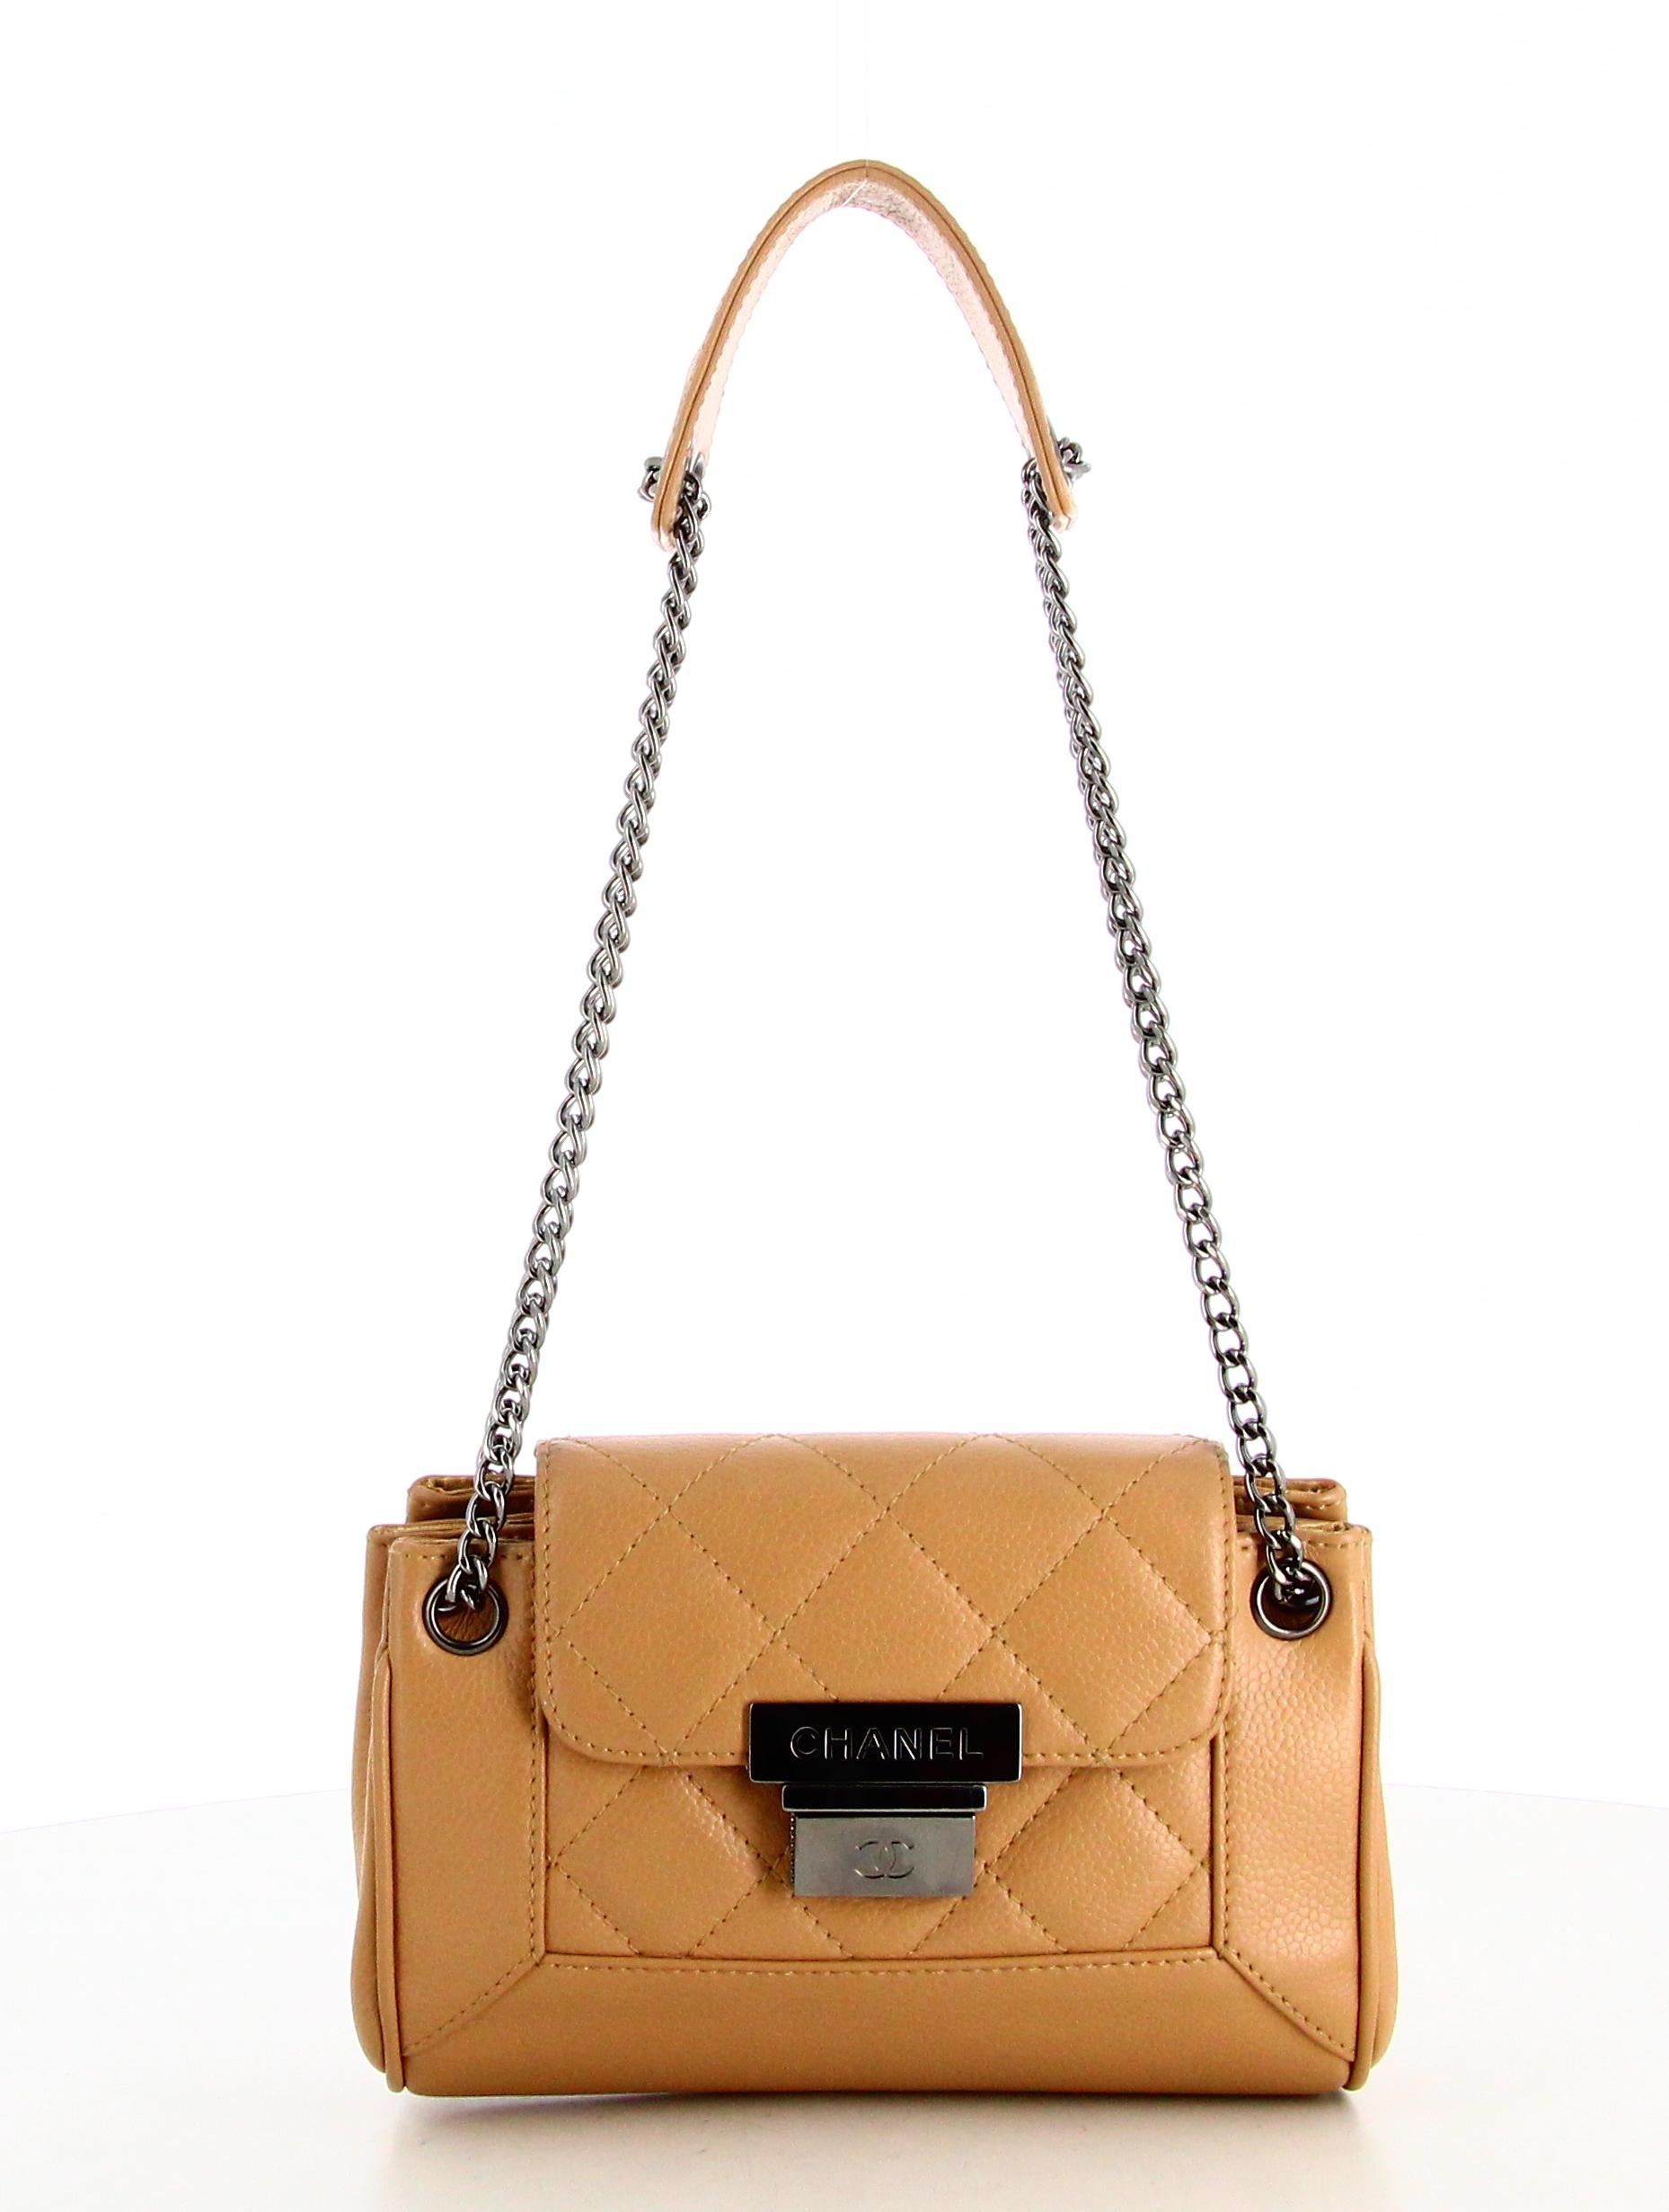 2003 Chanel Small Beige Quilted Handbag 

- Very good condition. Shows very slight signs of wear over time.
- Chanel Small Handbag 
- Beige leather chain 
- Clasp: silver Chanel logo on front 
- Inside: Chanel logo satin lining. Inside pocket